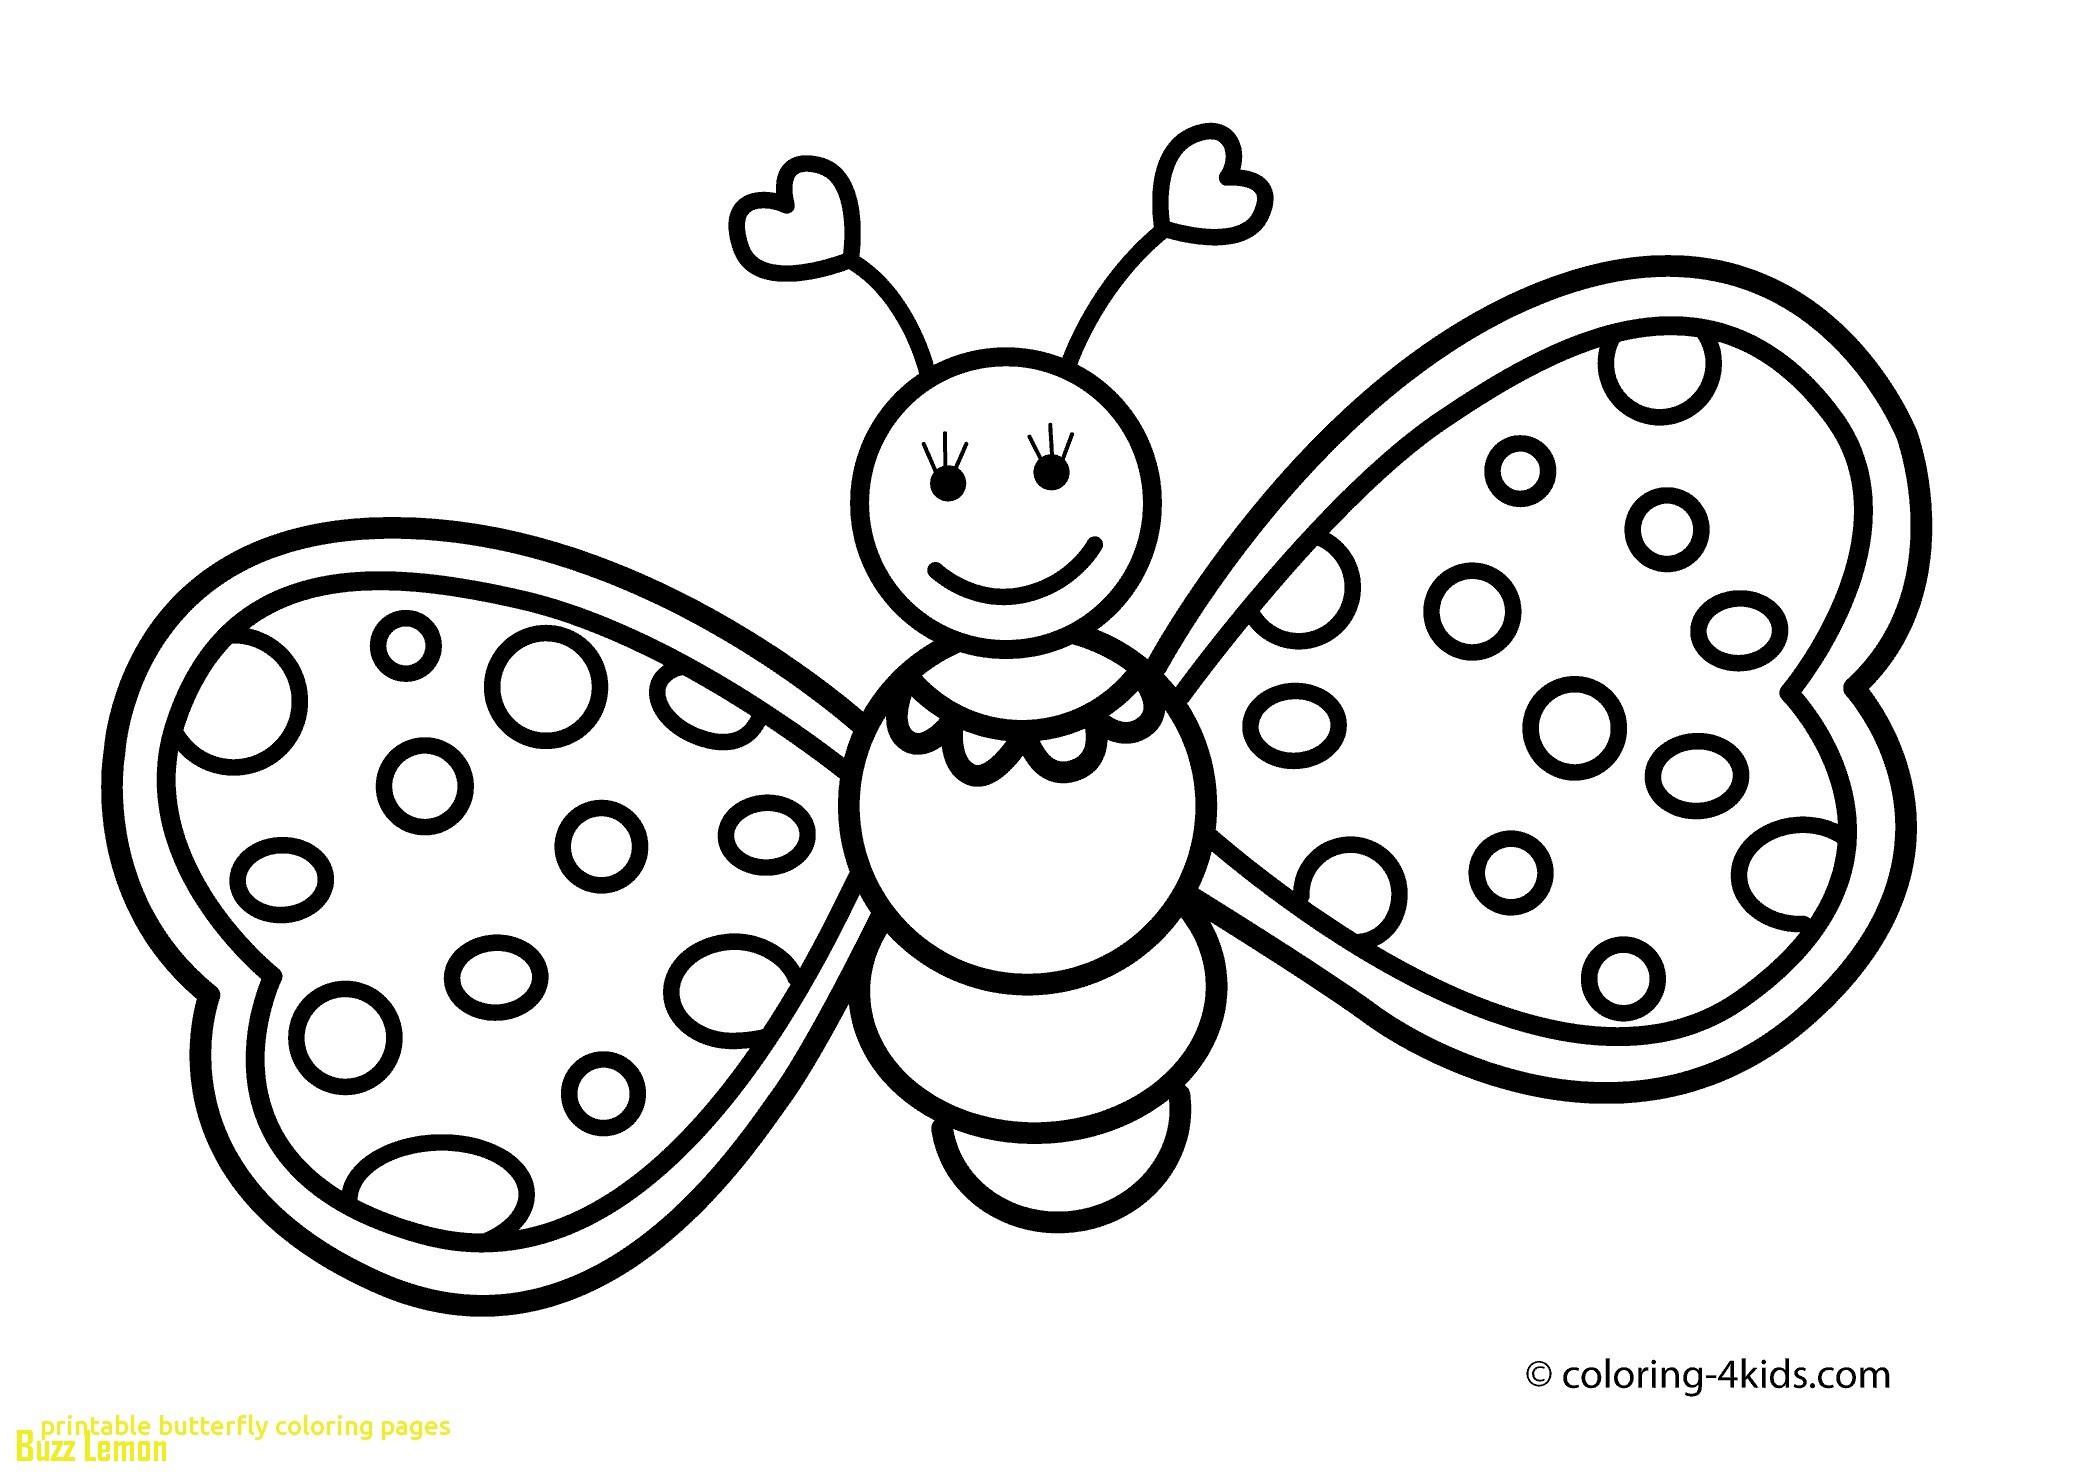 Butterflies Coloring Pages Unique Coloring Book Luxury Coloring Page butterfly Beautiful Printable